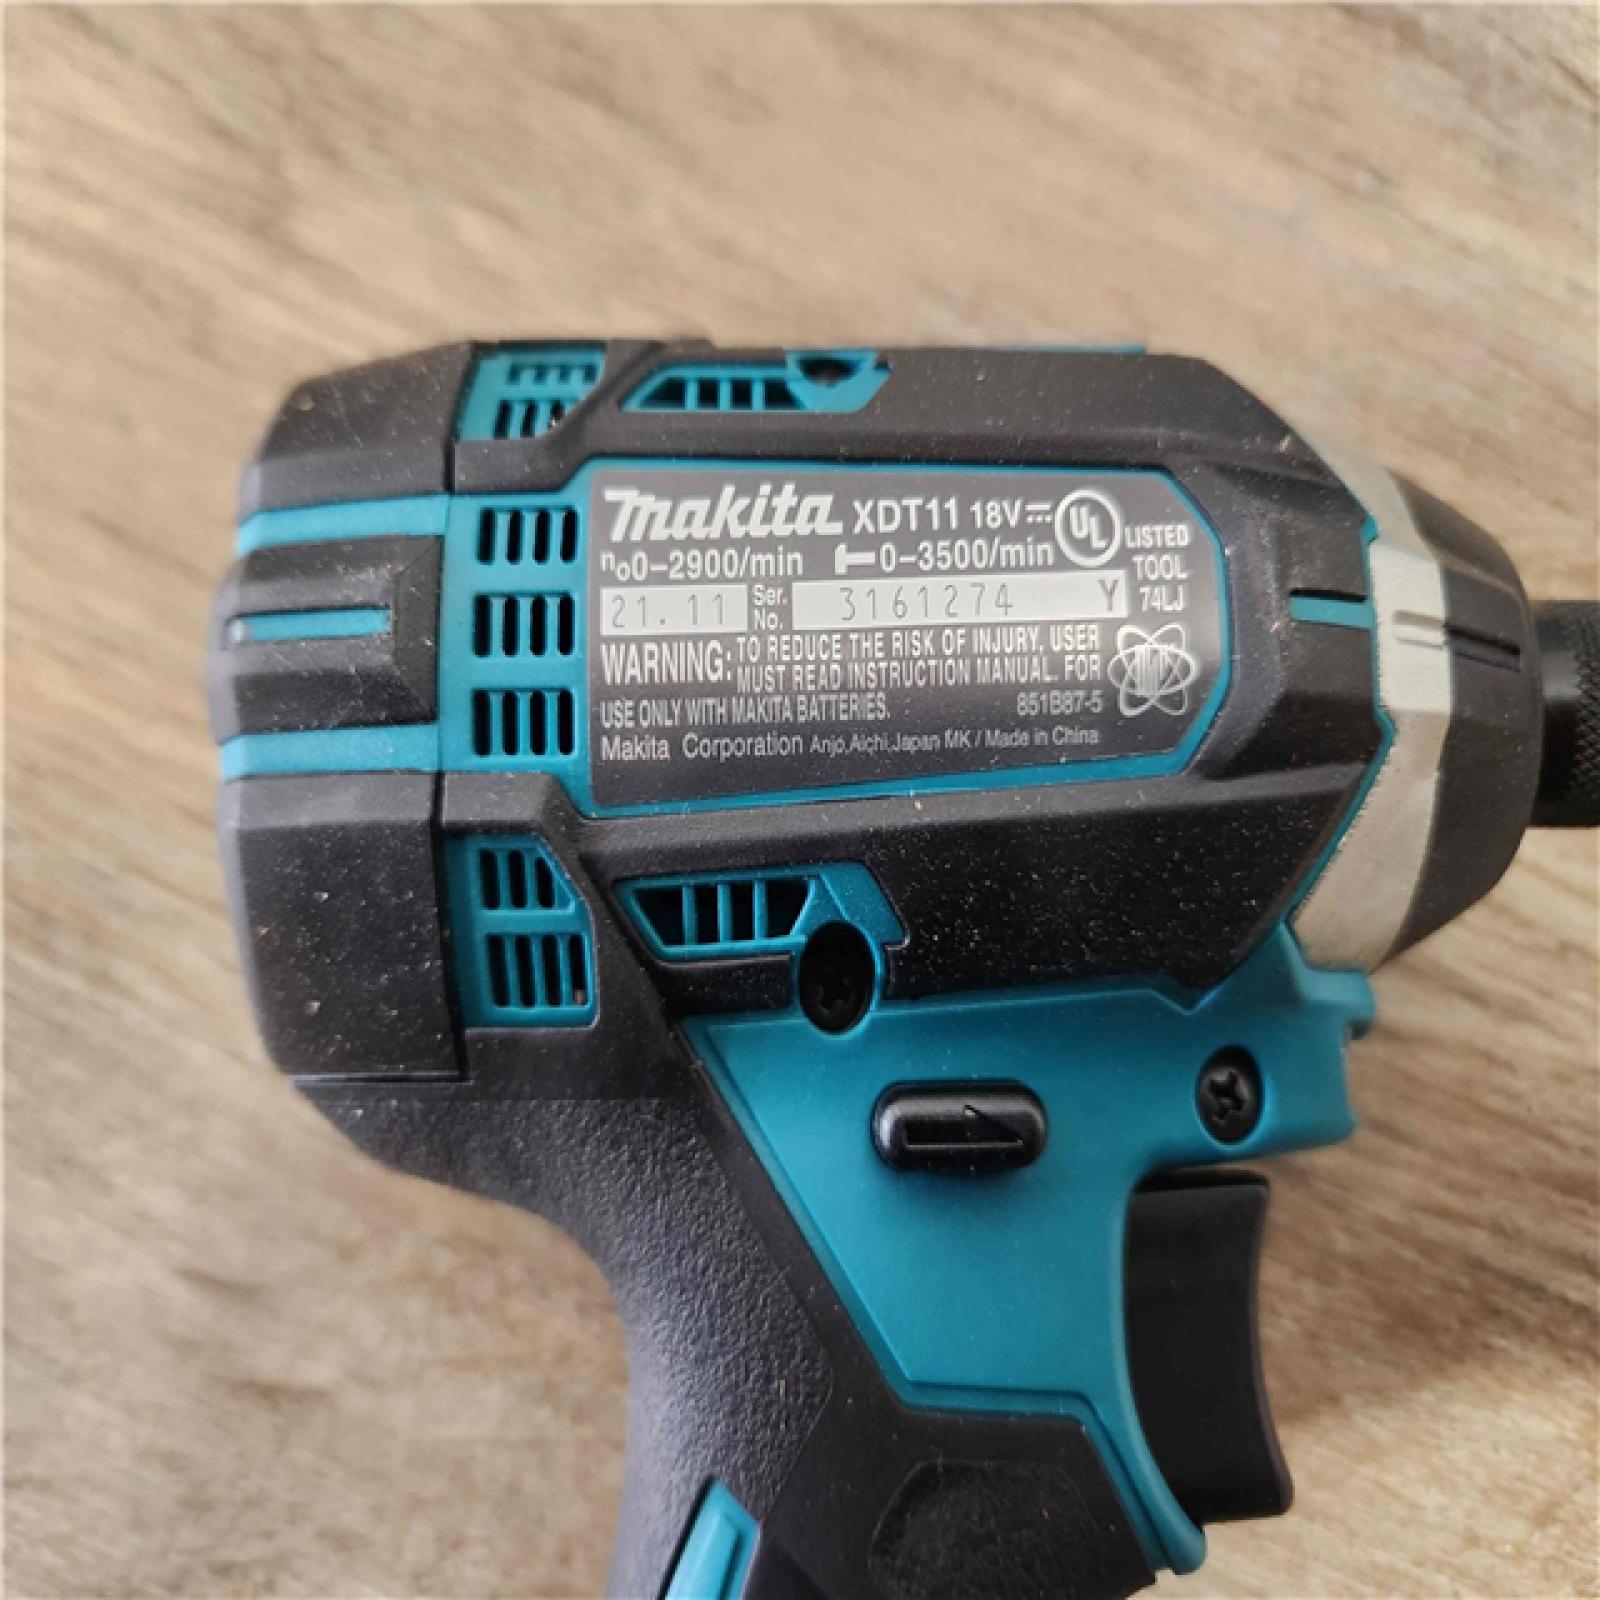 Phoenix Location Appears NEW Makita 18V LXT Lithium-Ion Cordless Compact 2-Piece Combo Kit (Driver-Drill/Impact Driver)